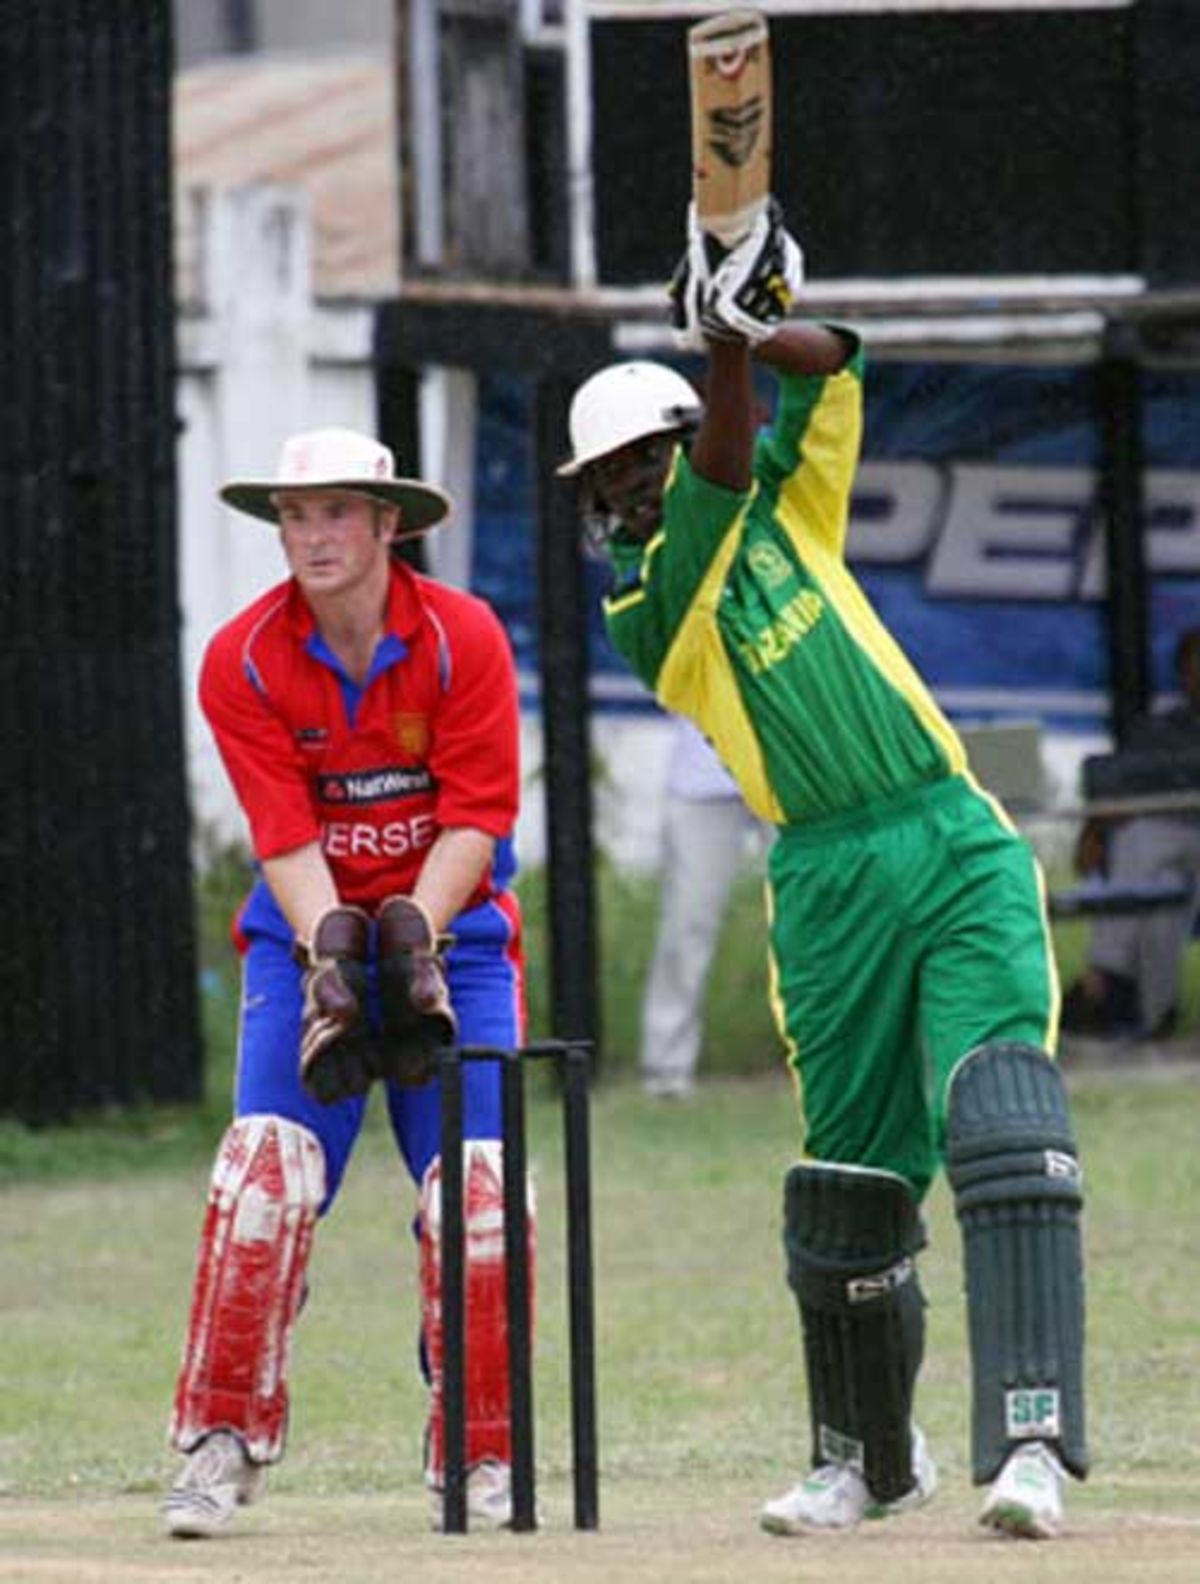 Hamisi Abdallah during his 31 against Jersey, Tanzania v Jersey, ICC World Cricket League Division Four, Dar-es-Salaam, October 4, 2008